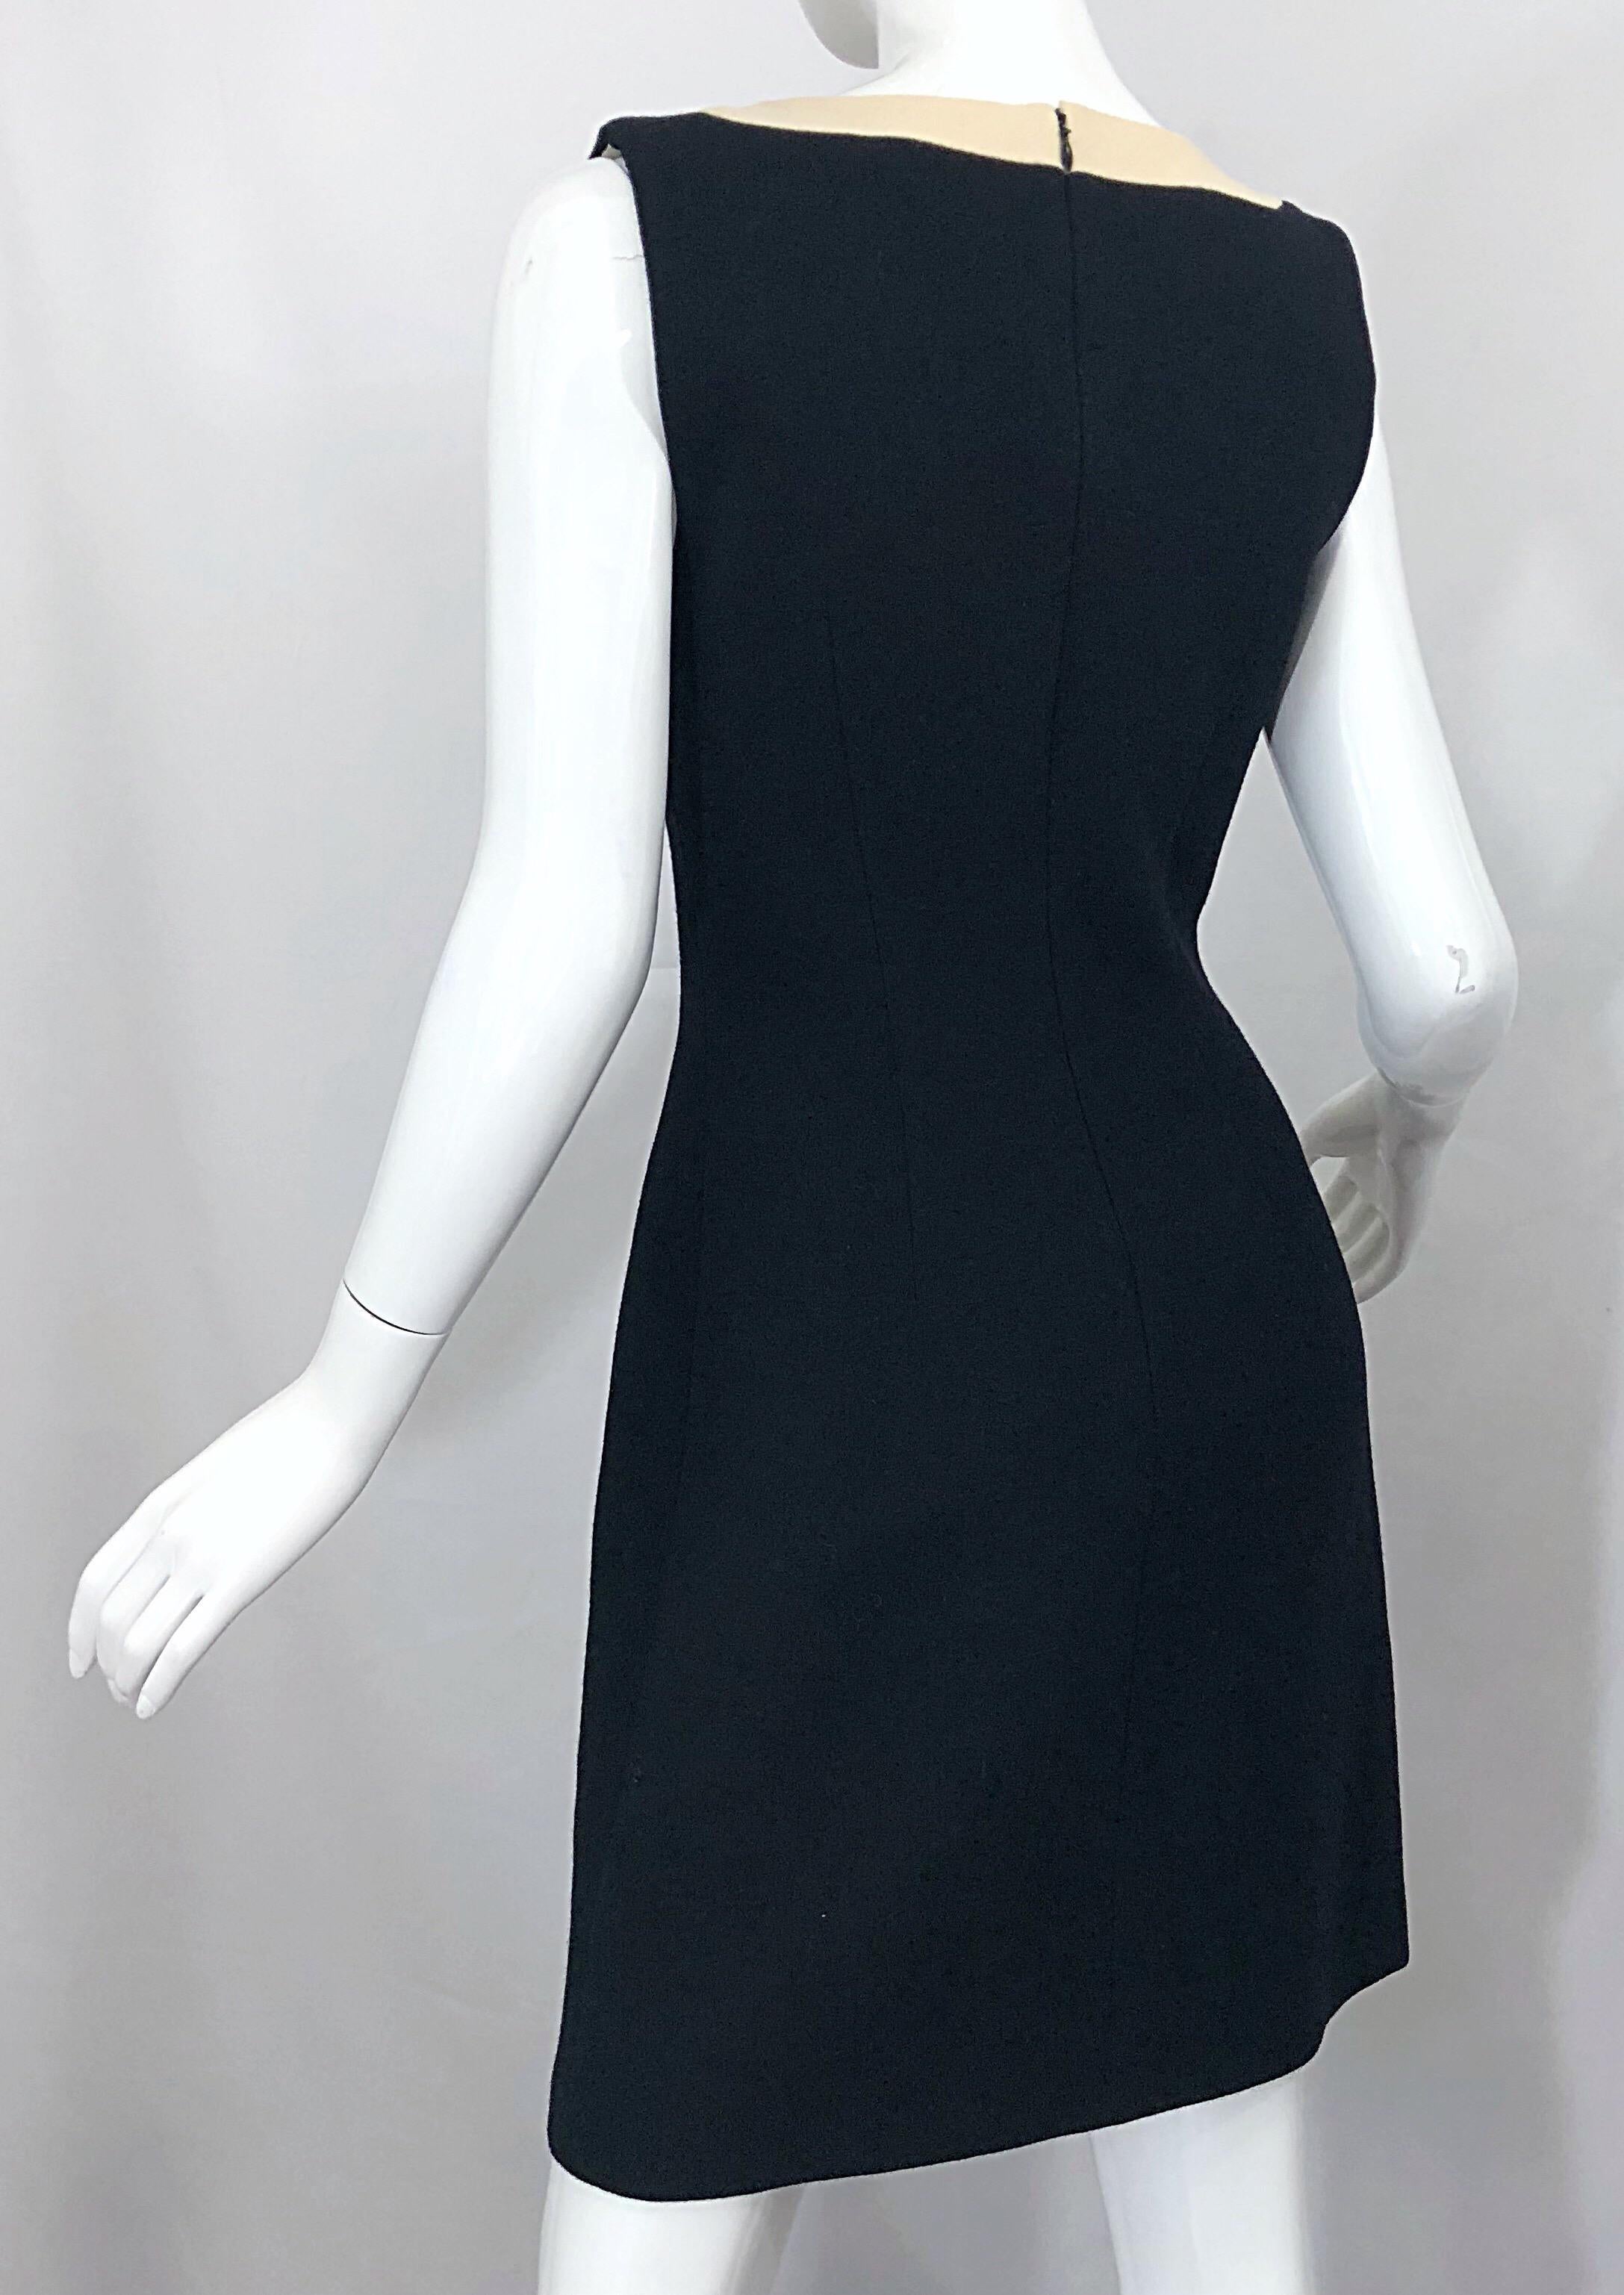 Dolce & Gabbana Size 42 / US 6 Black and Ivory 1990s Does 1960s Wool Shift Dress For Sale 2